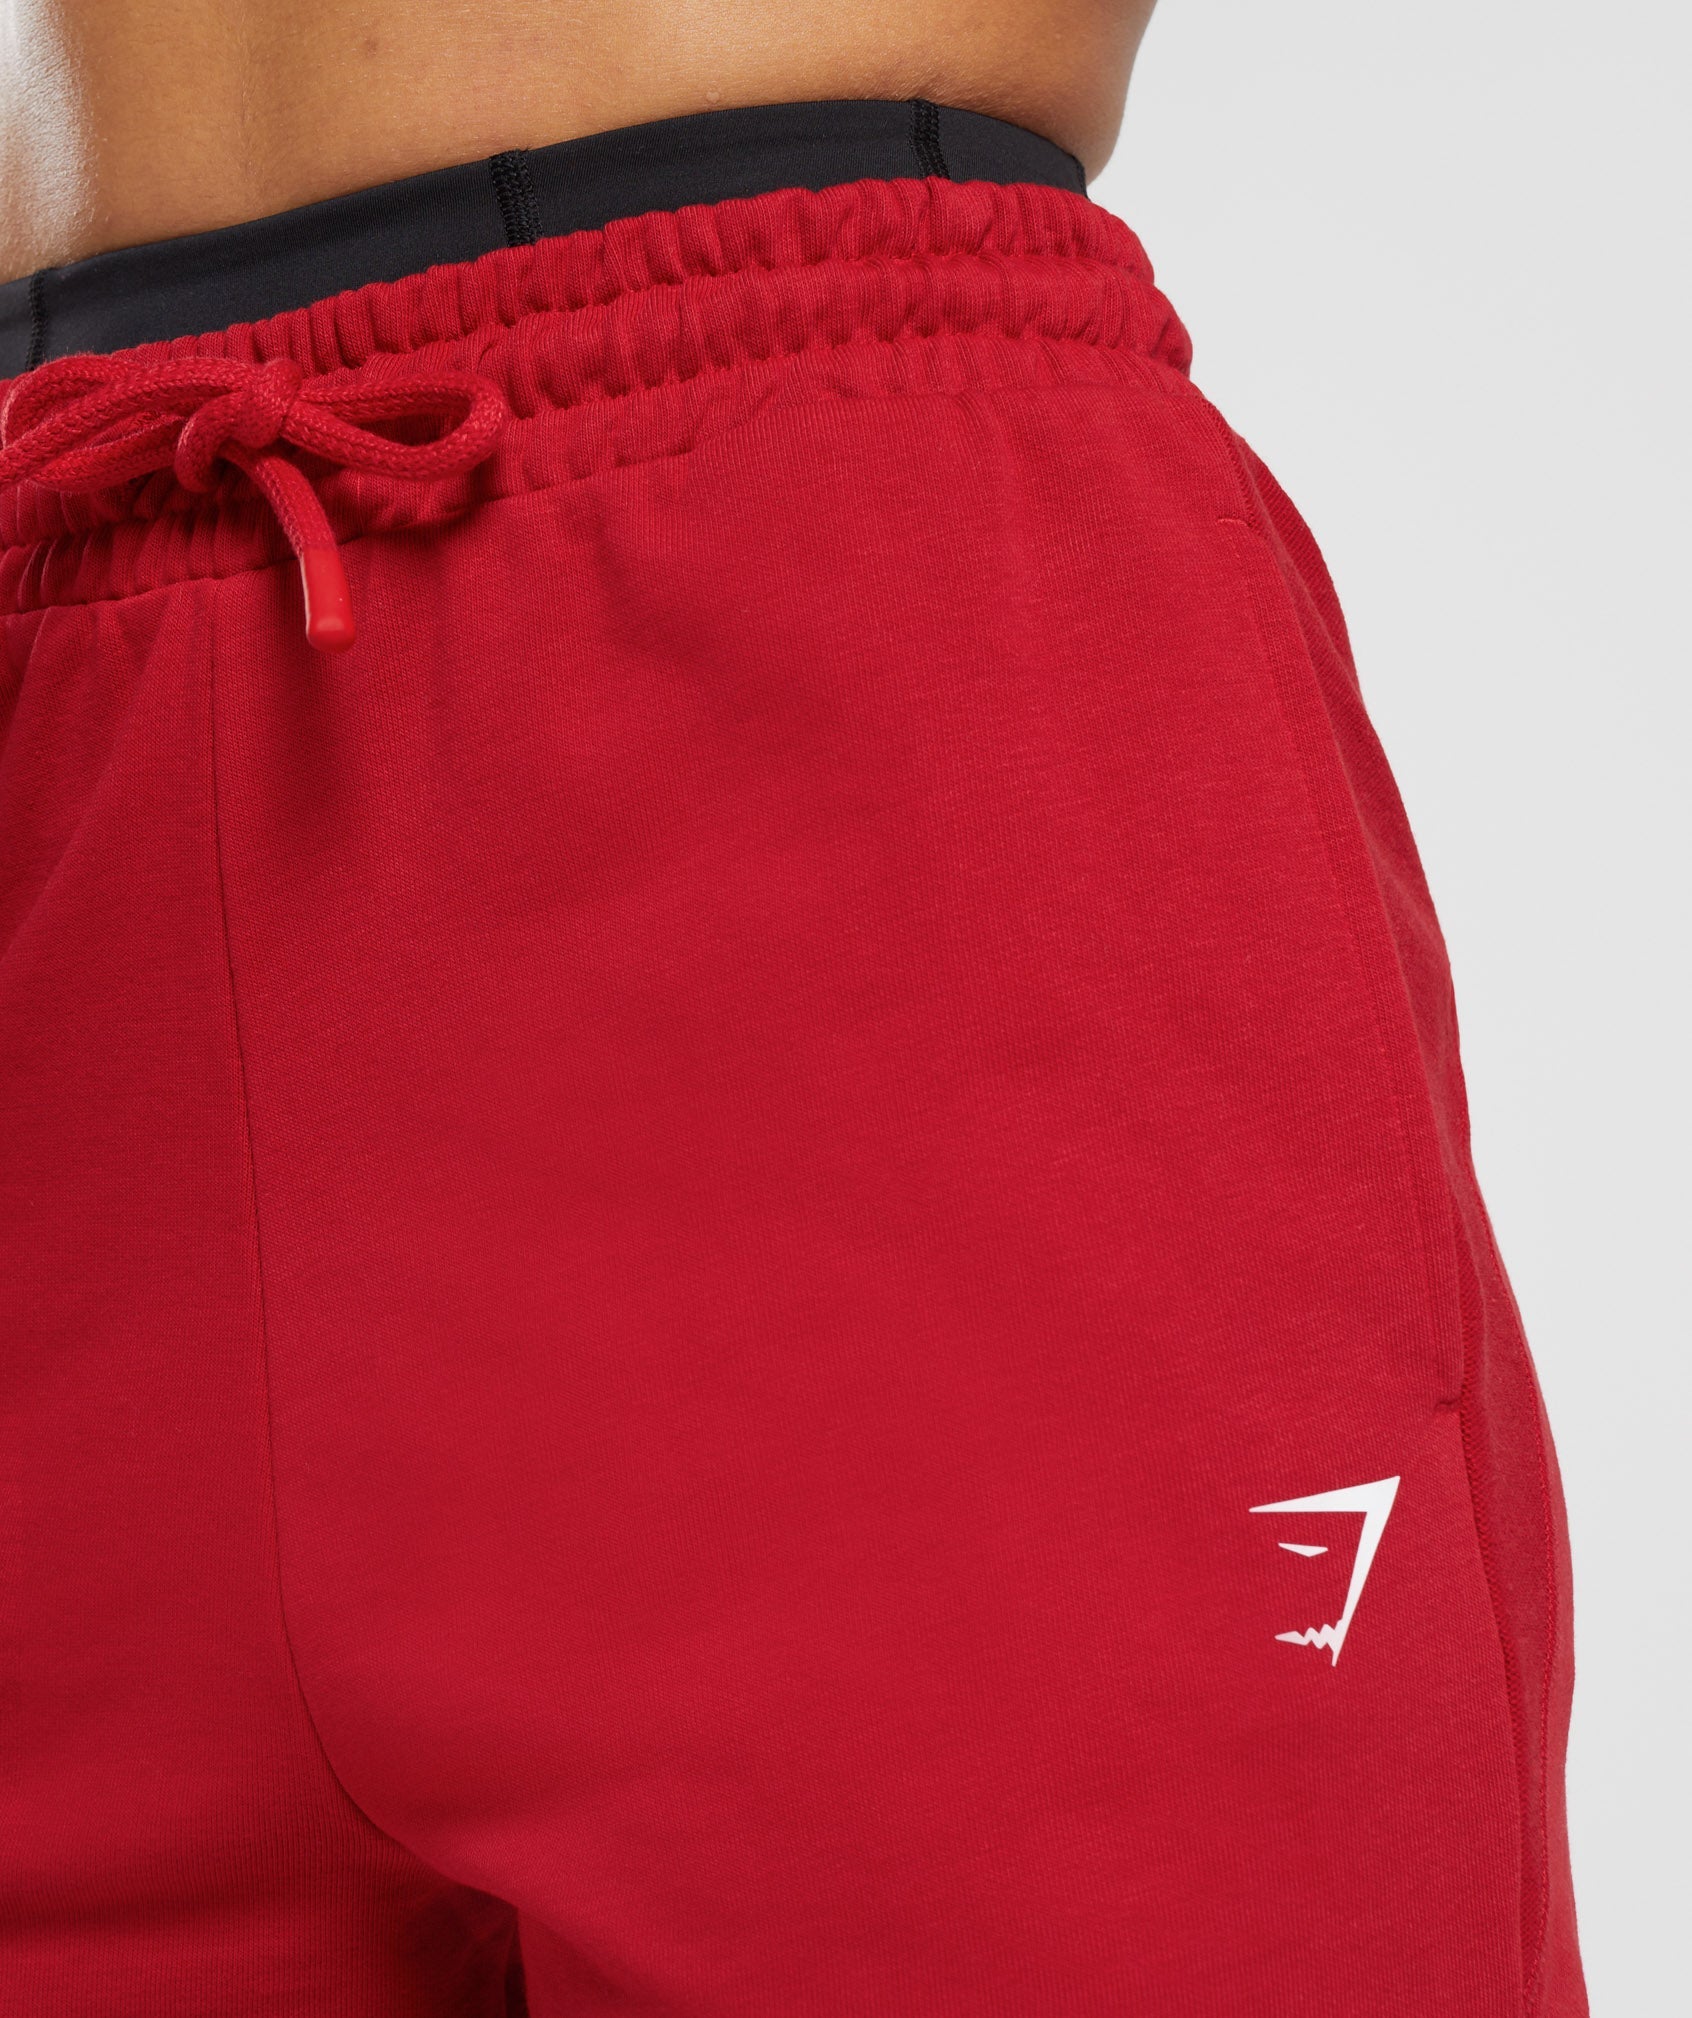 GS Power Joggers in Red - view 5